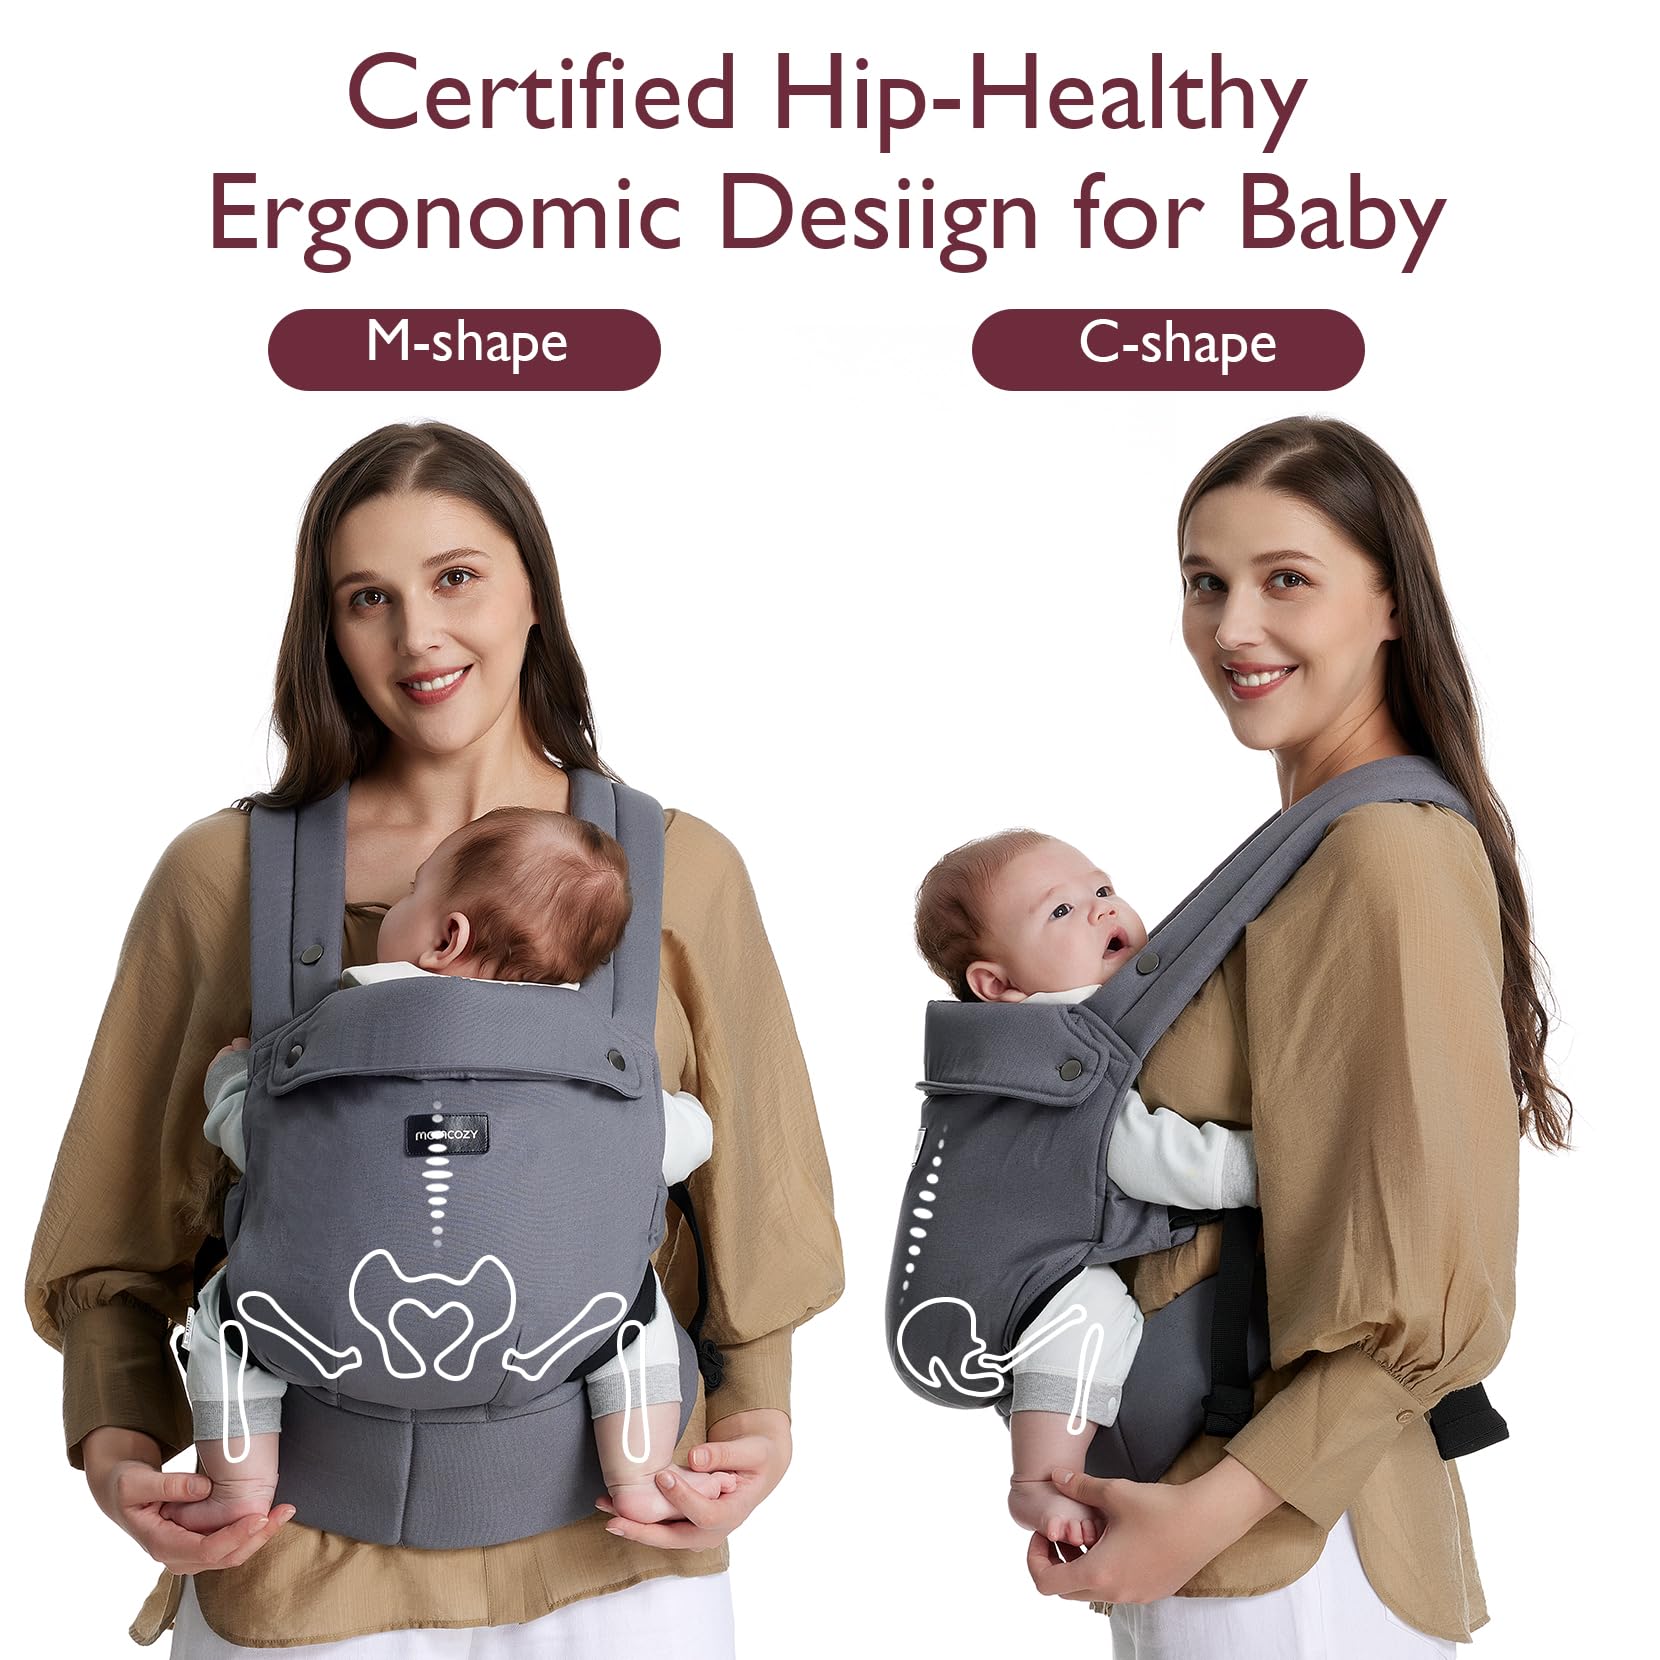 Baby Carrier Newborn to Toddler - Grey Color